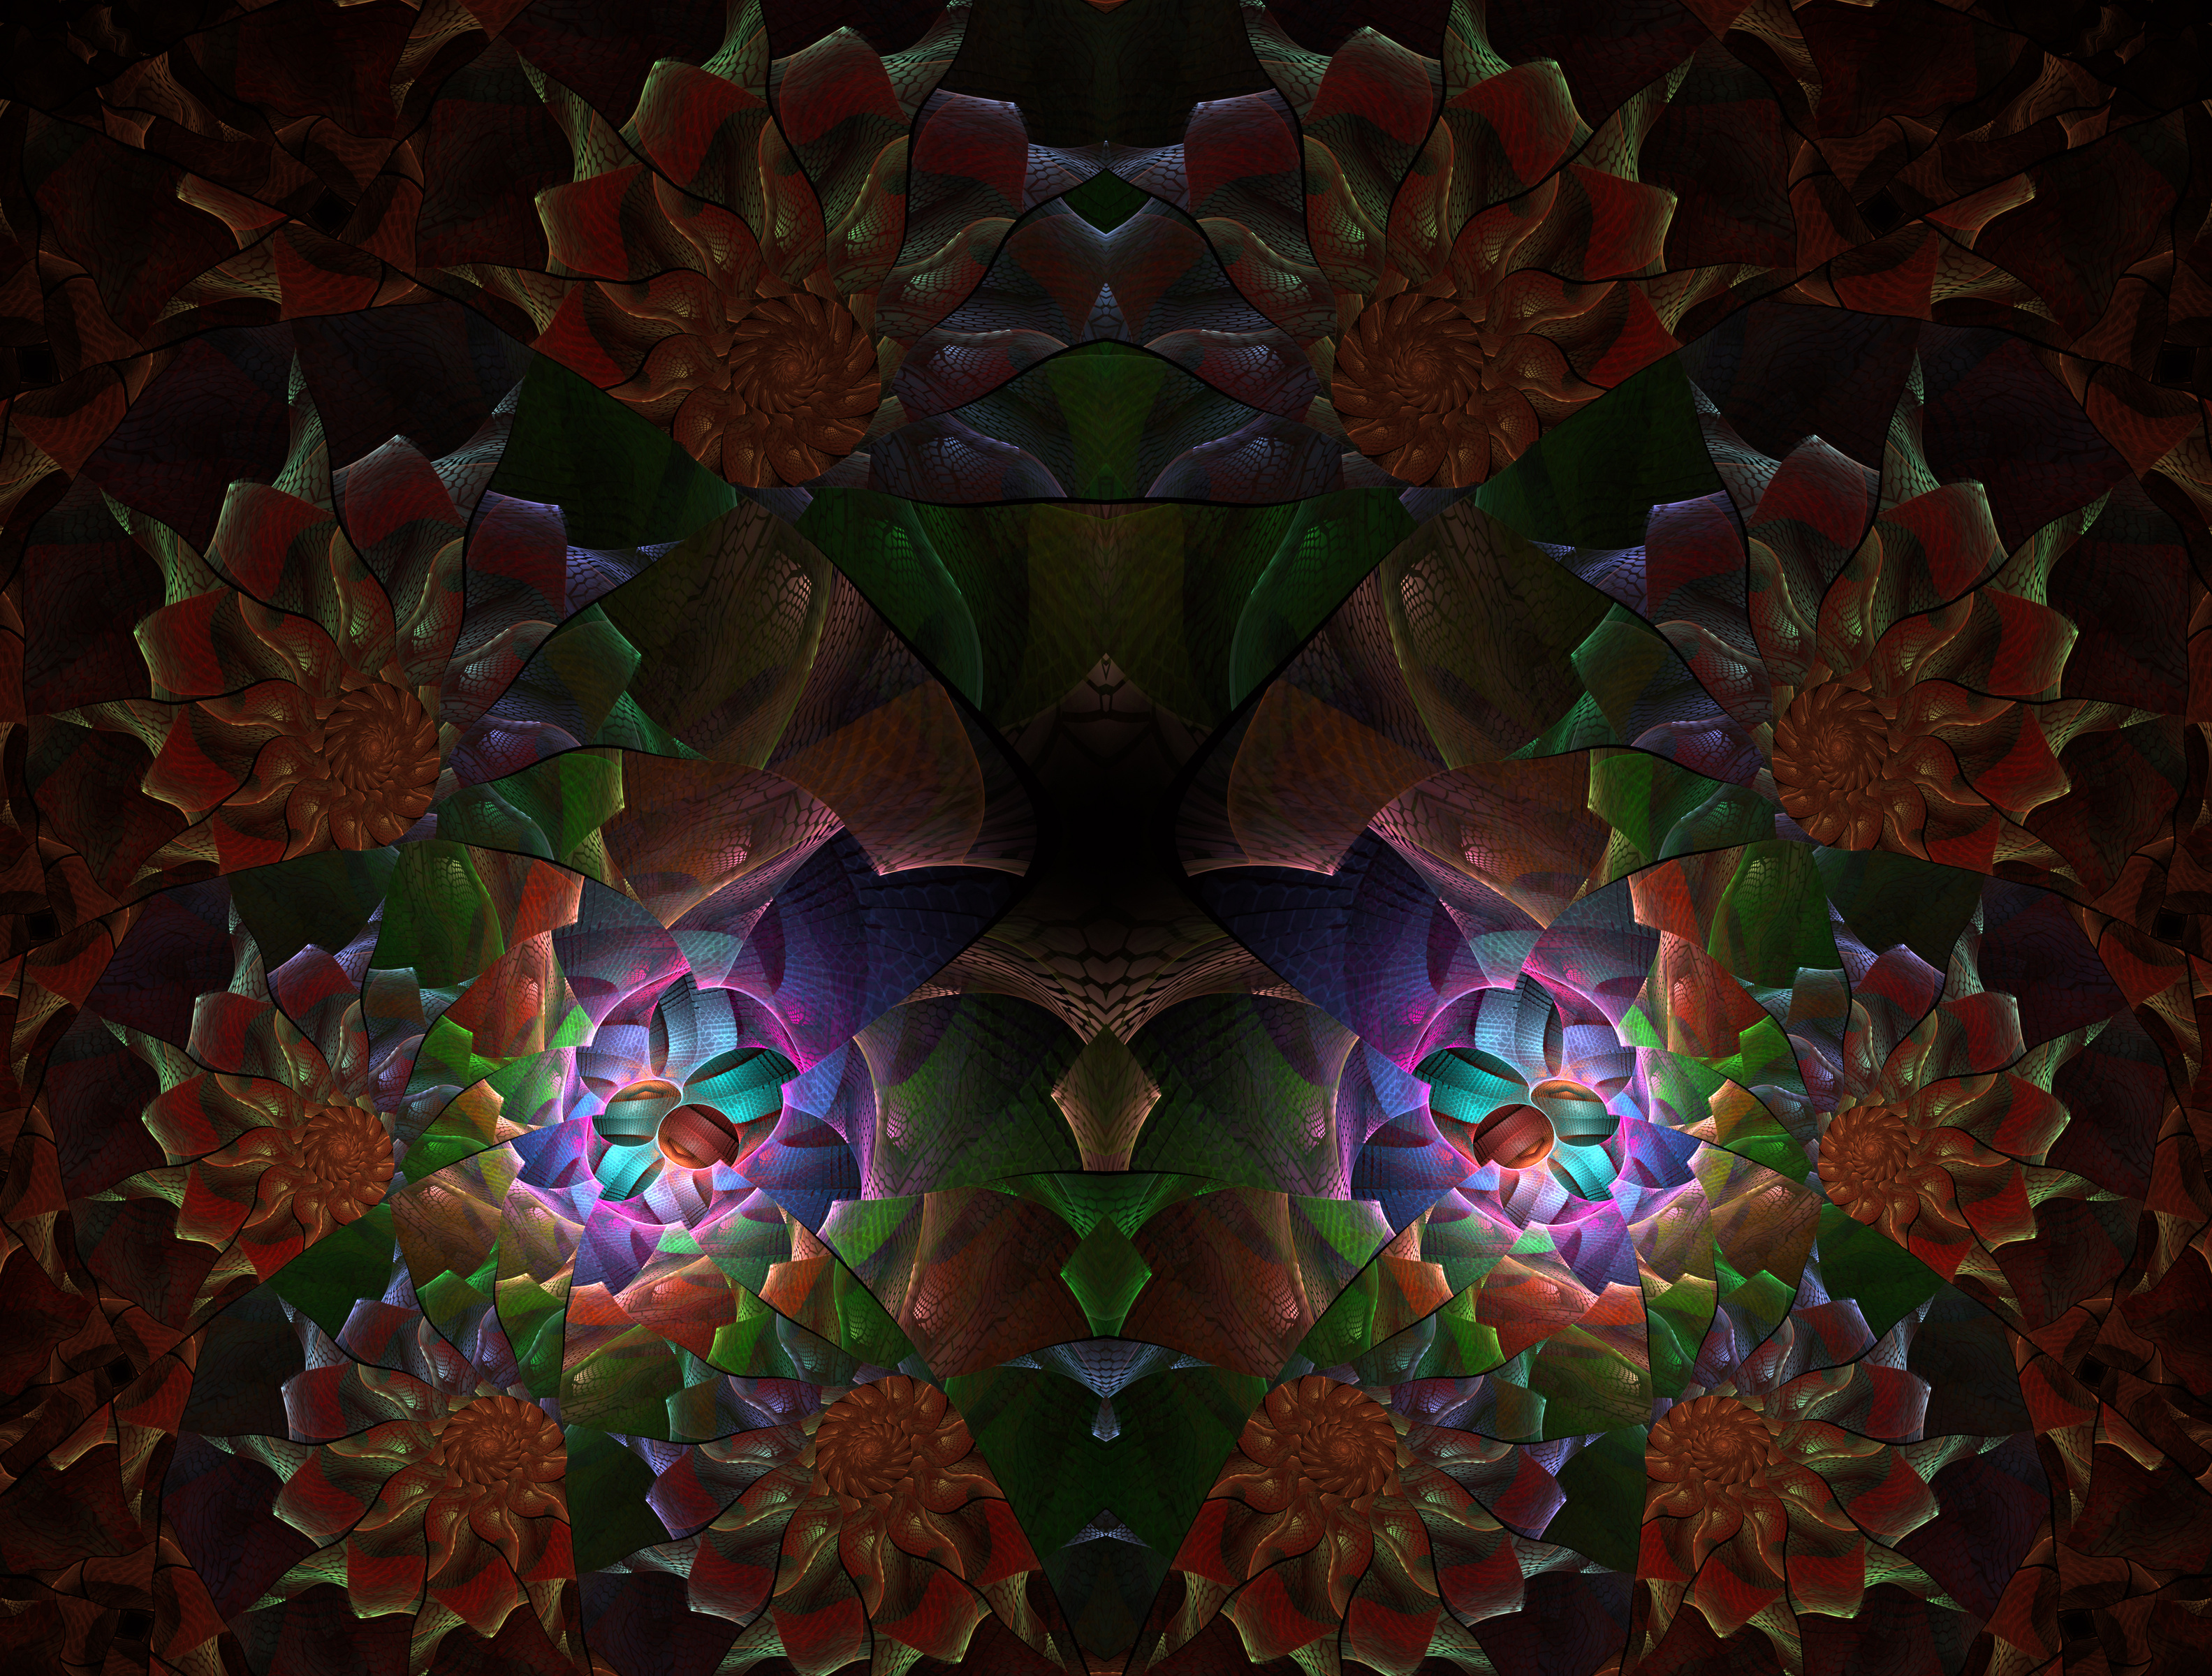 Colorful floral stained glass impression kaleidoscopic design. Beautiful toned mosaic pattern for art background, (fractal church stained glass abstraction)